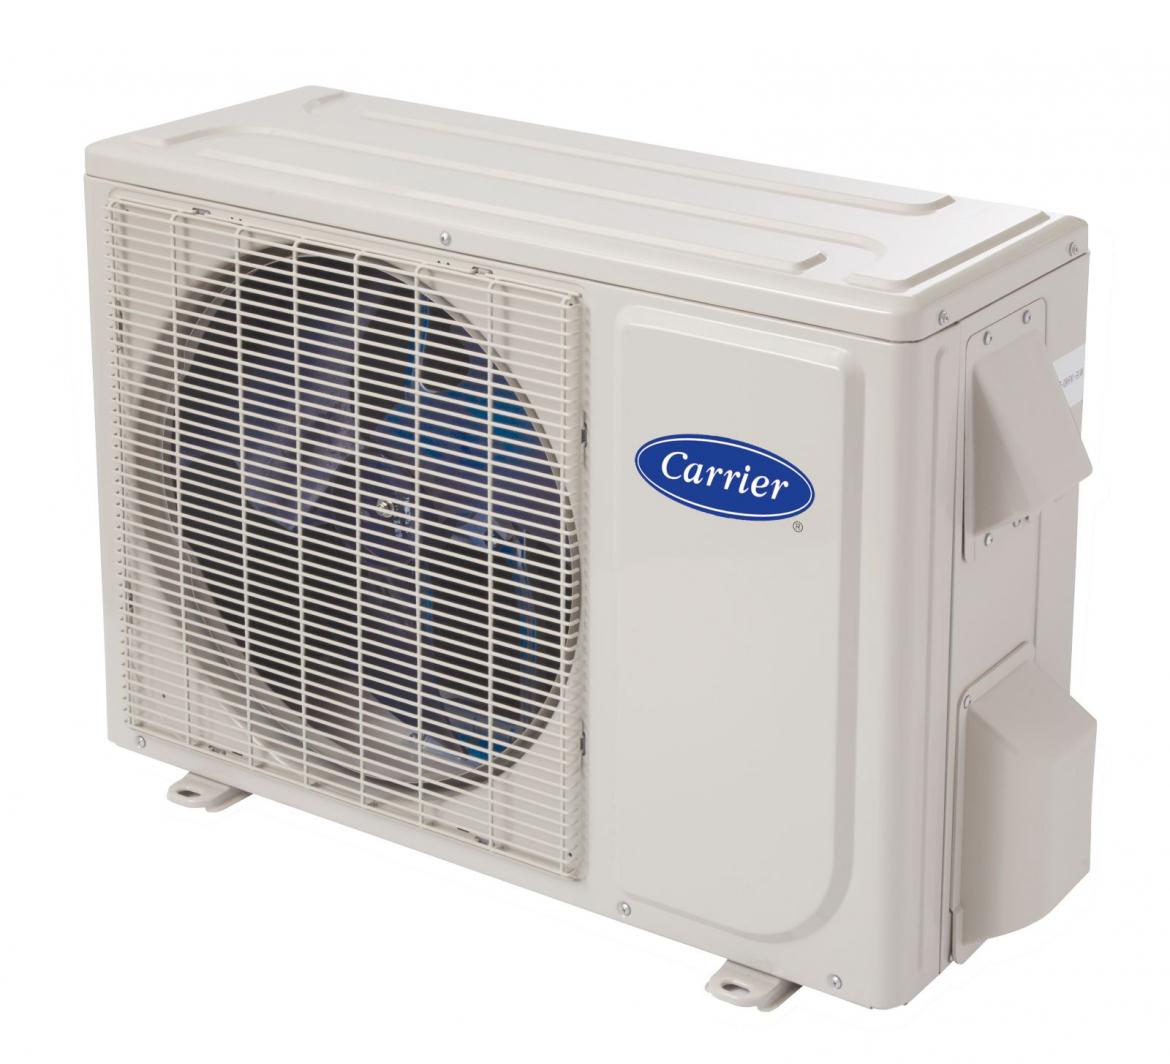 Air conditioning manufacturer Carrier has unveiled a new line of Performance Series single-zone ductless outdoor units that offer stronger performance in extreme temperatures as well as an energy efficiency rating up to 25 SEER.